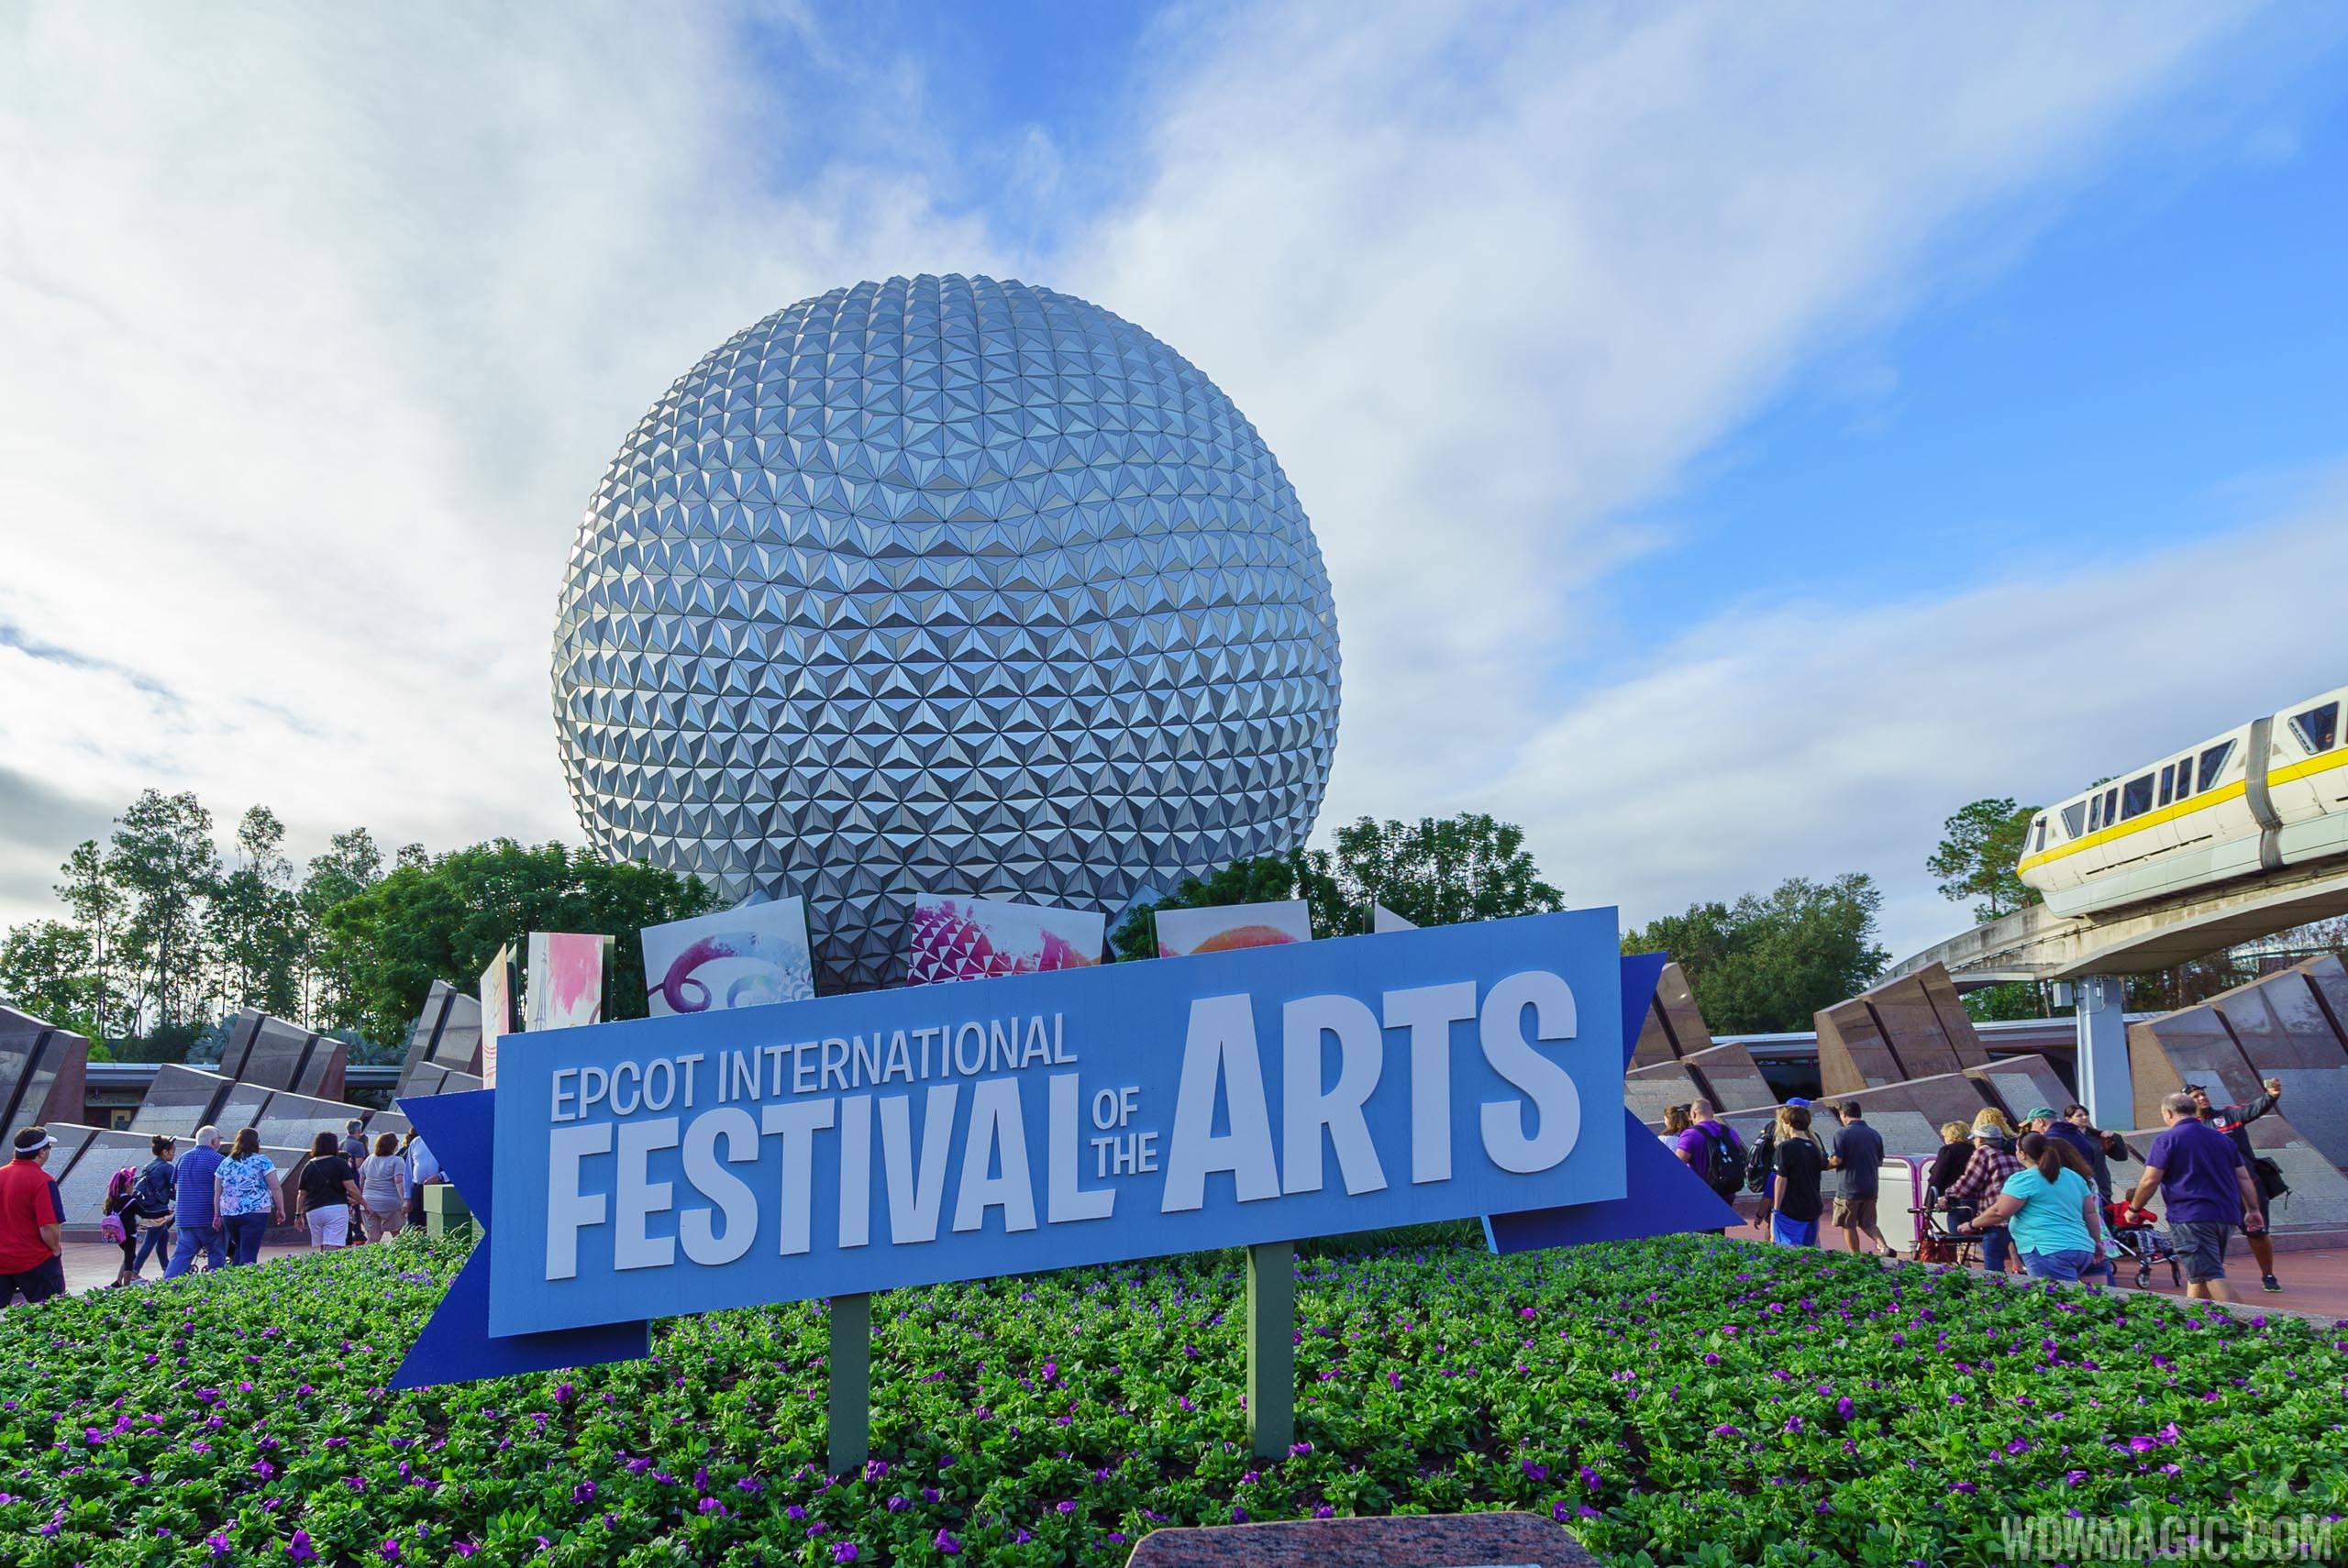 Epcot International Festival of the Arts 2019 Workshops now available for reservations